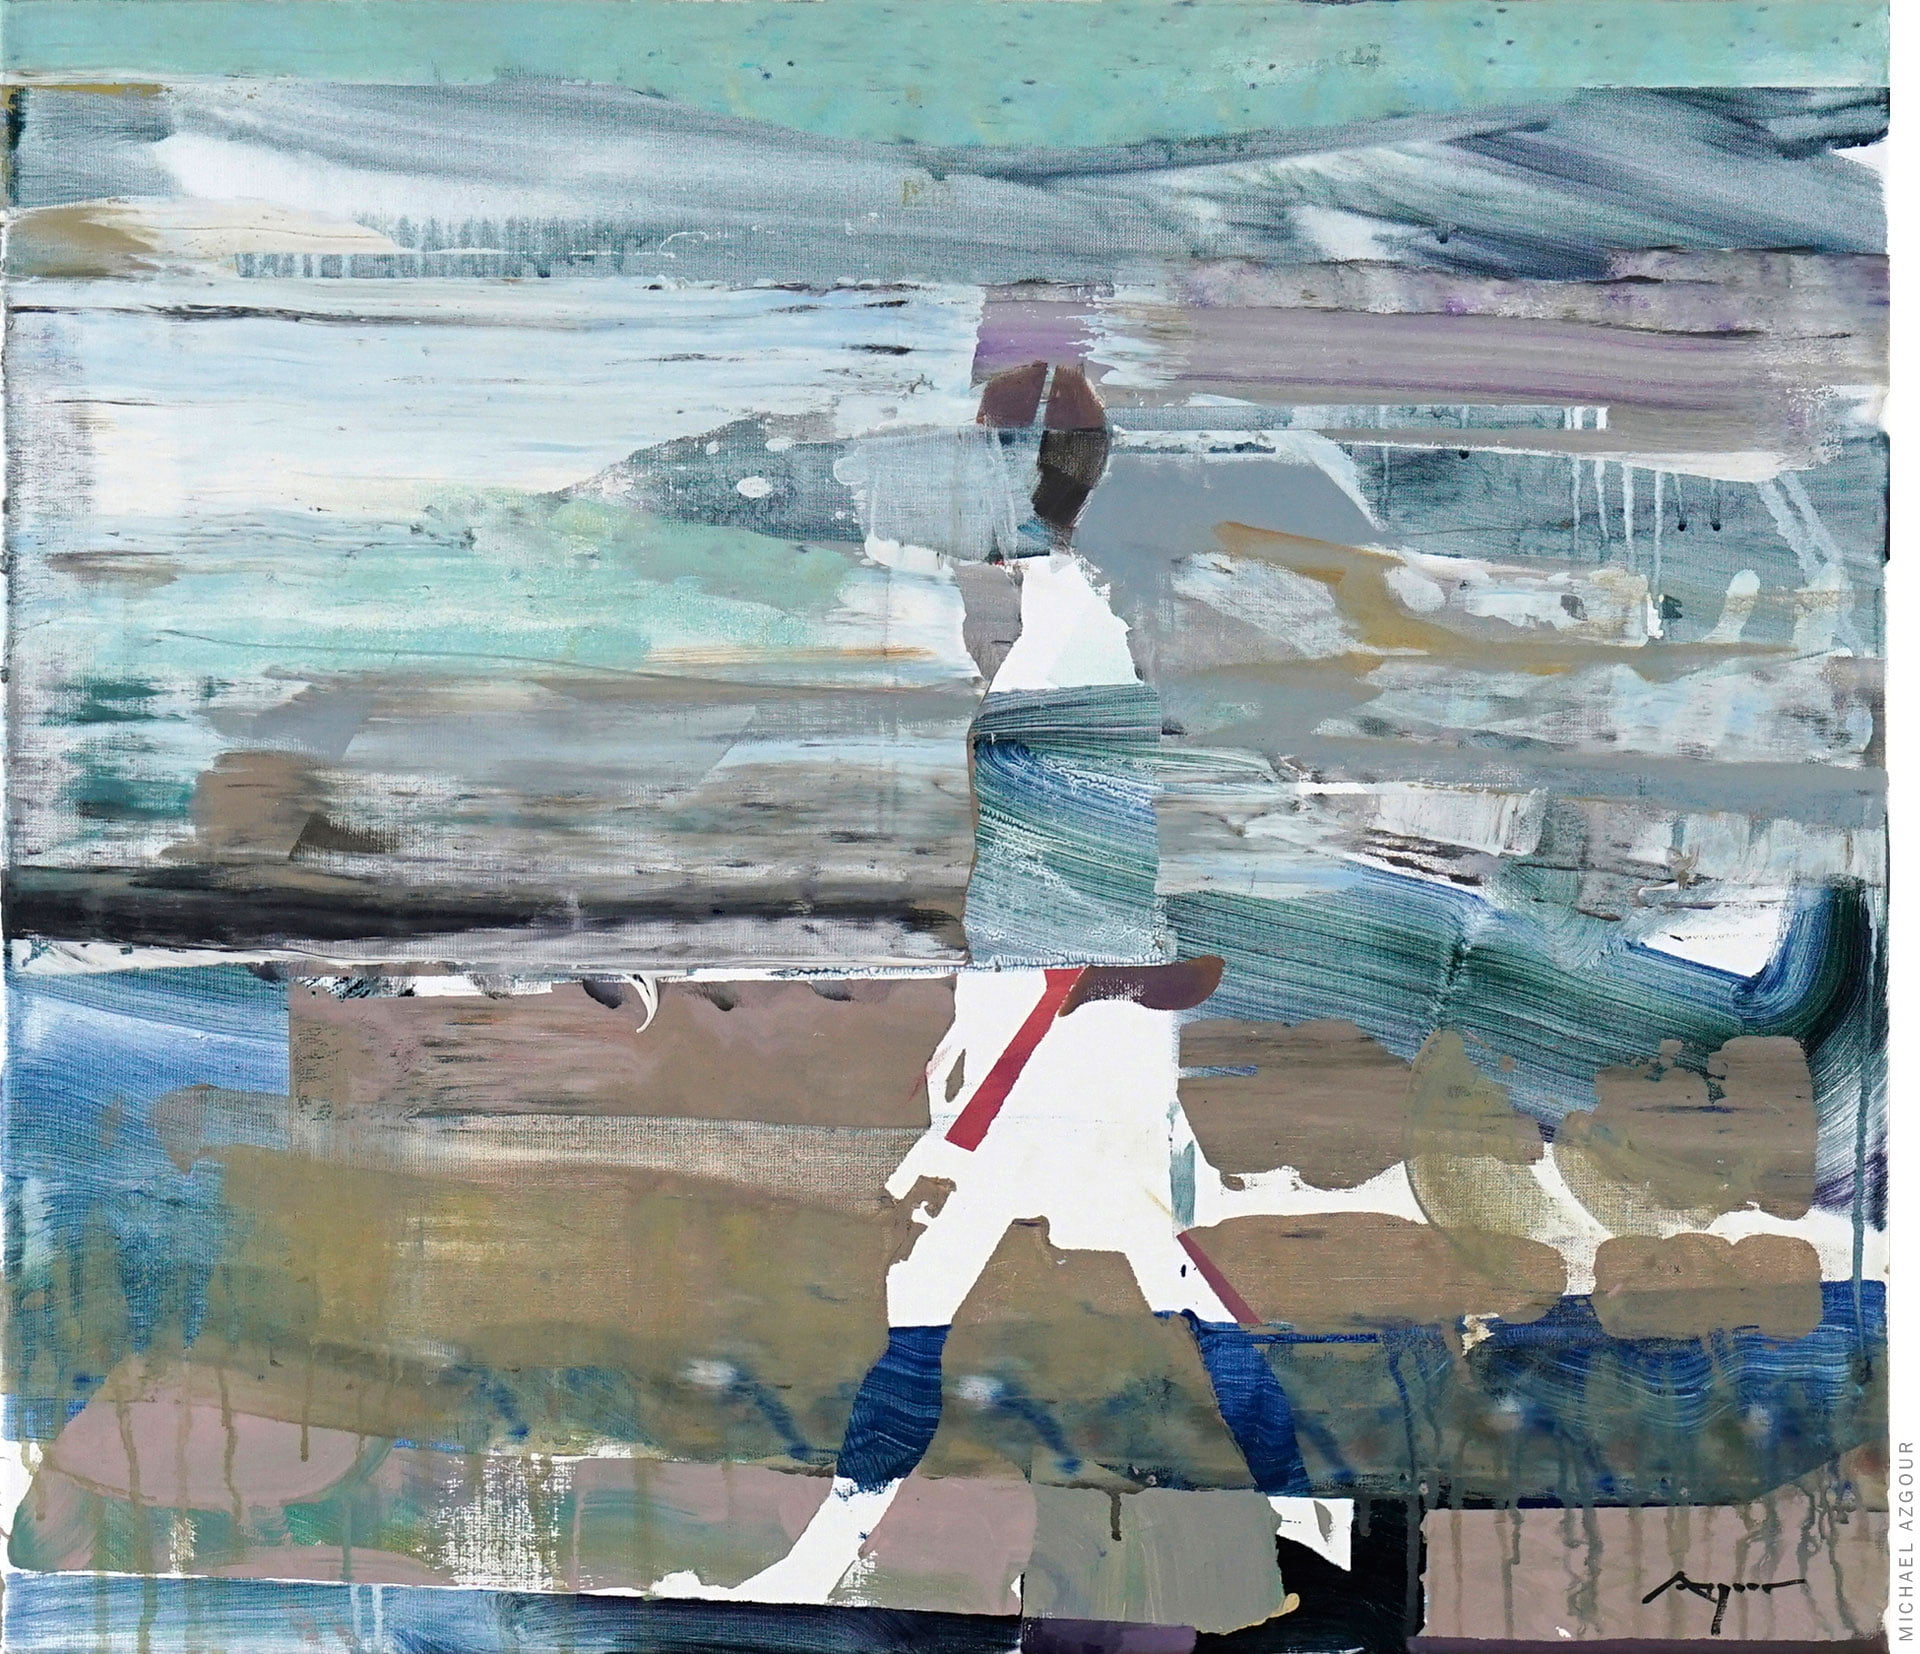 Abstract figurative painting by California artist, Michael Azgour, titled #beachwalking, 2020, acrylic on linen